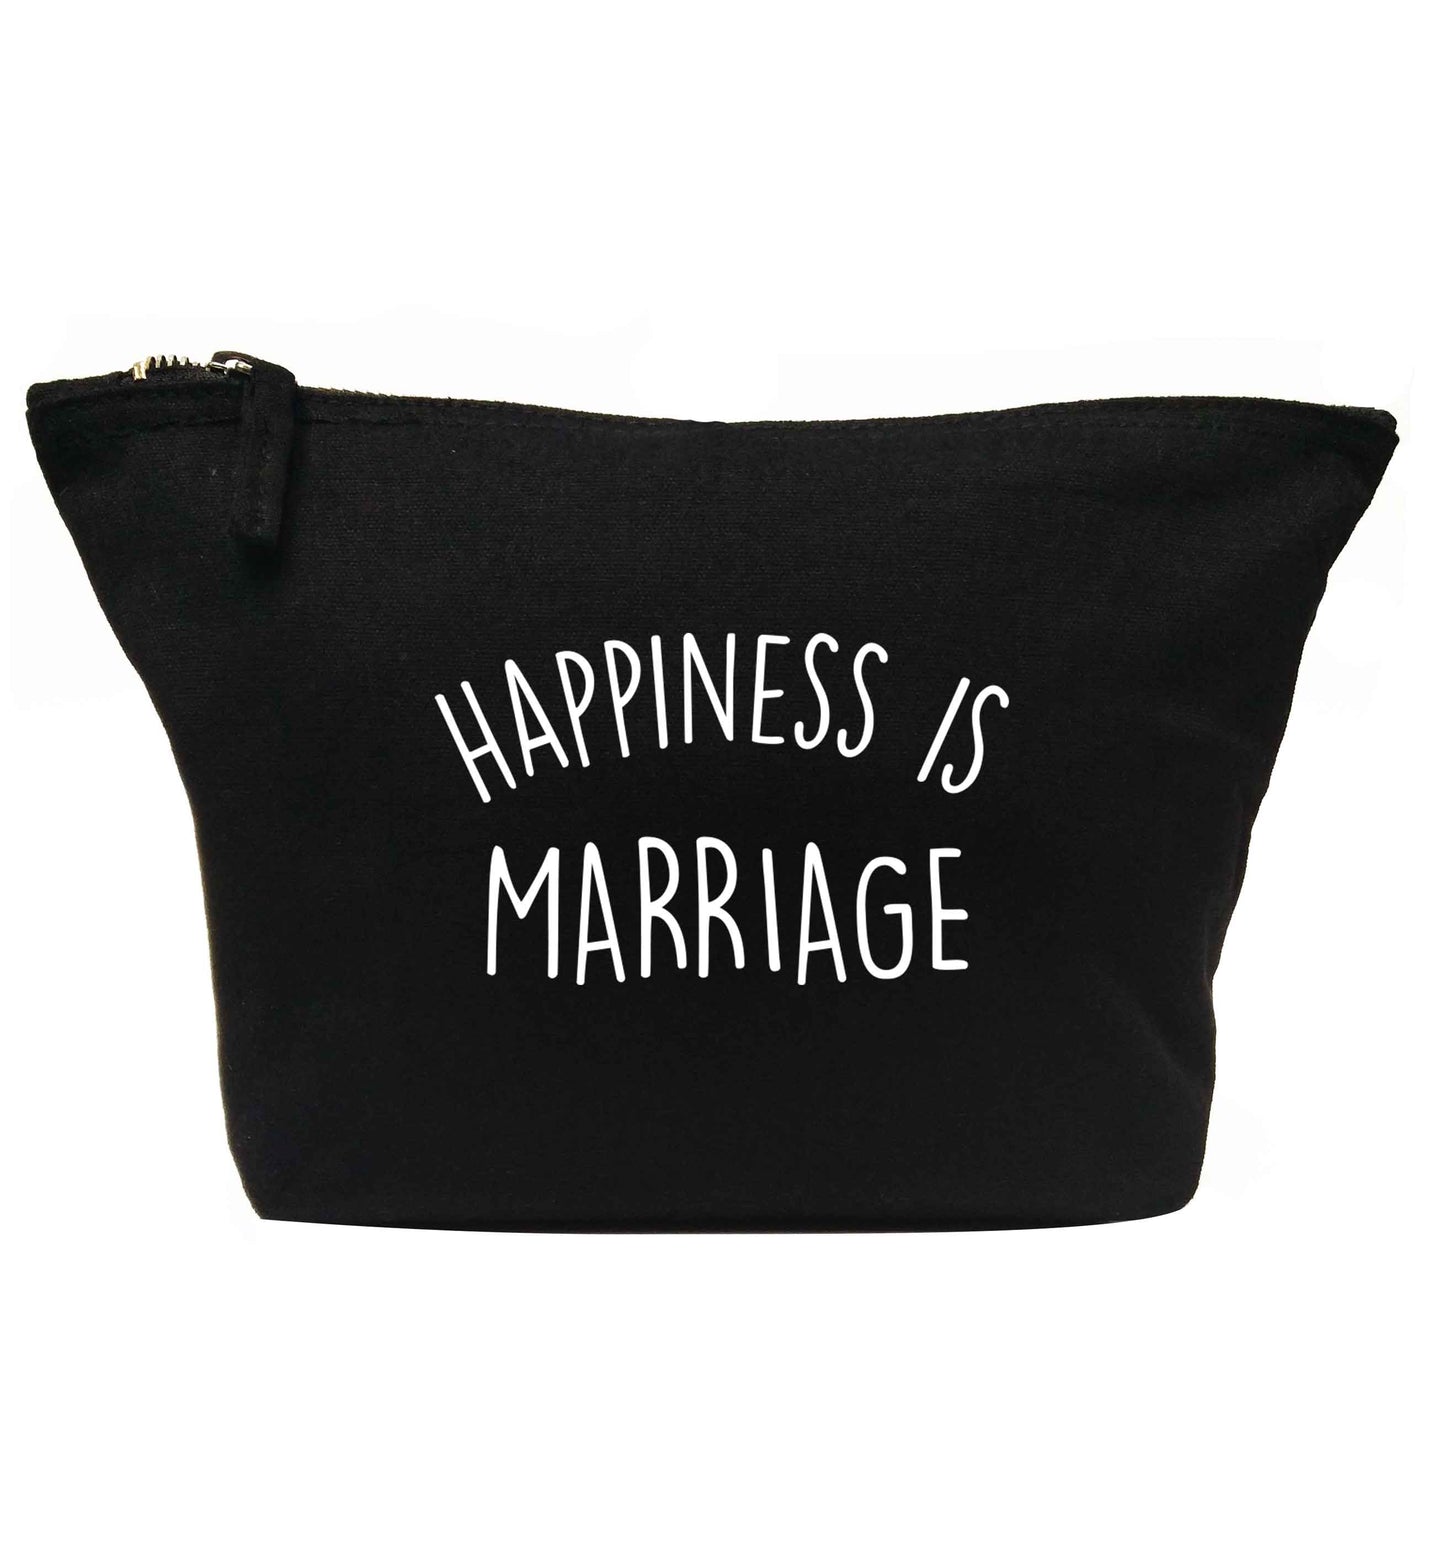 Happiness is marriage | Makeup / wash bag